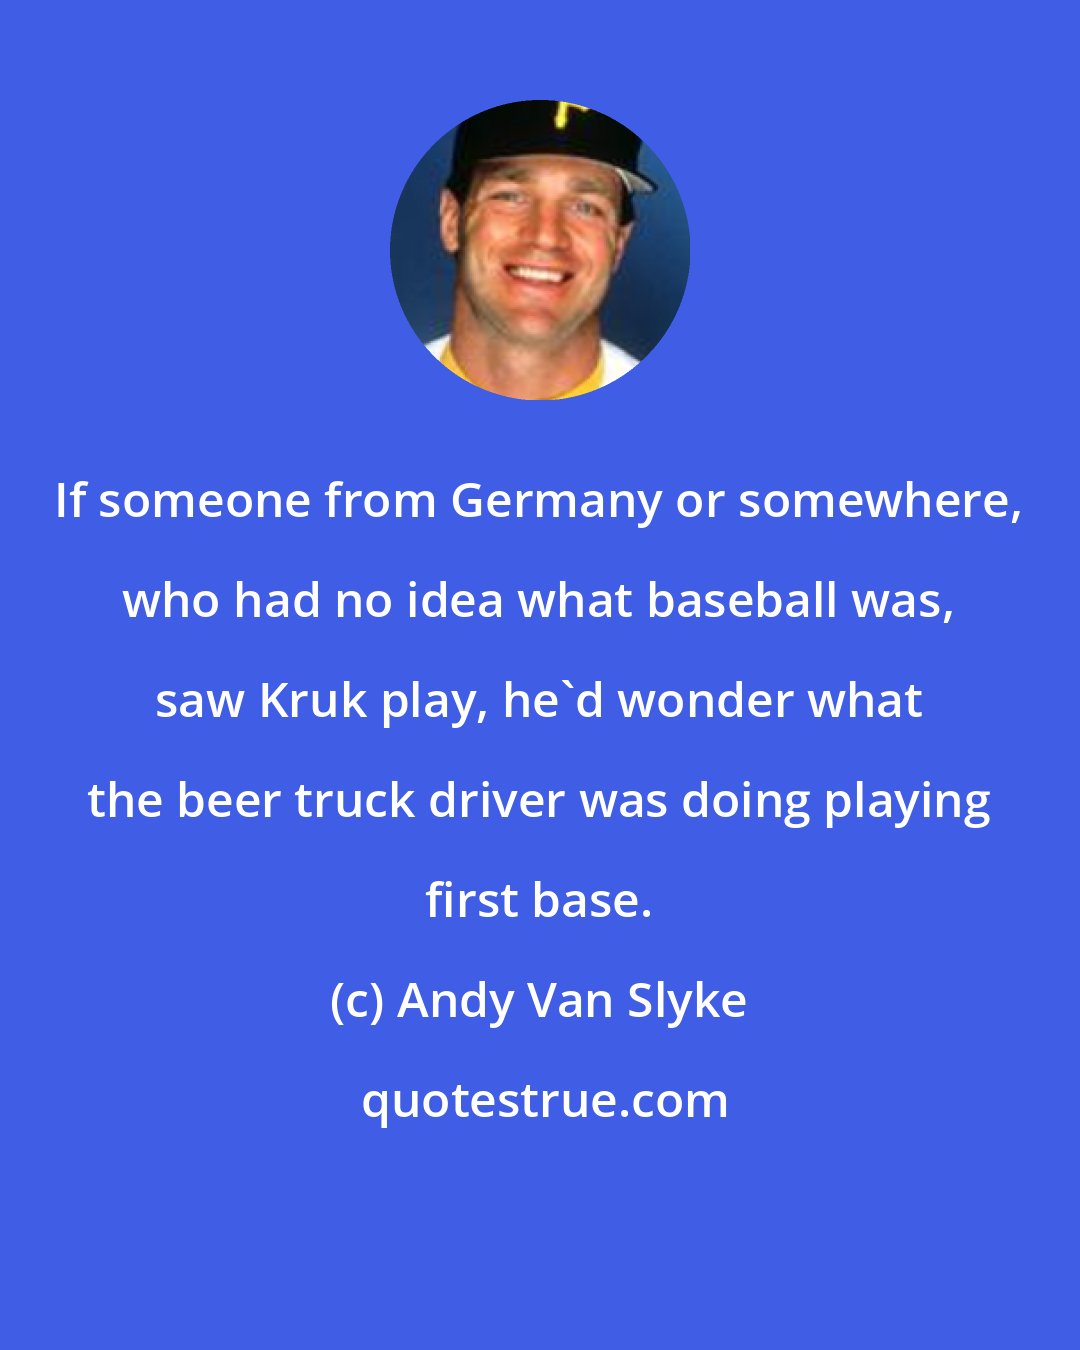 Andy Van Slyke: If someone from Germany or somewhere, who had no idea what baseball was, saw Kruk play, he'd wonder what the beer truck driver was doing playing first base.